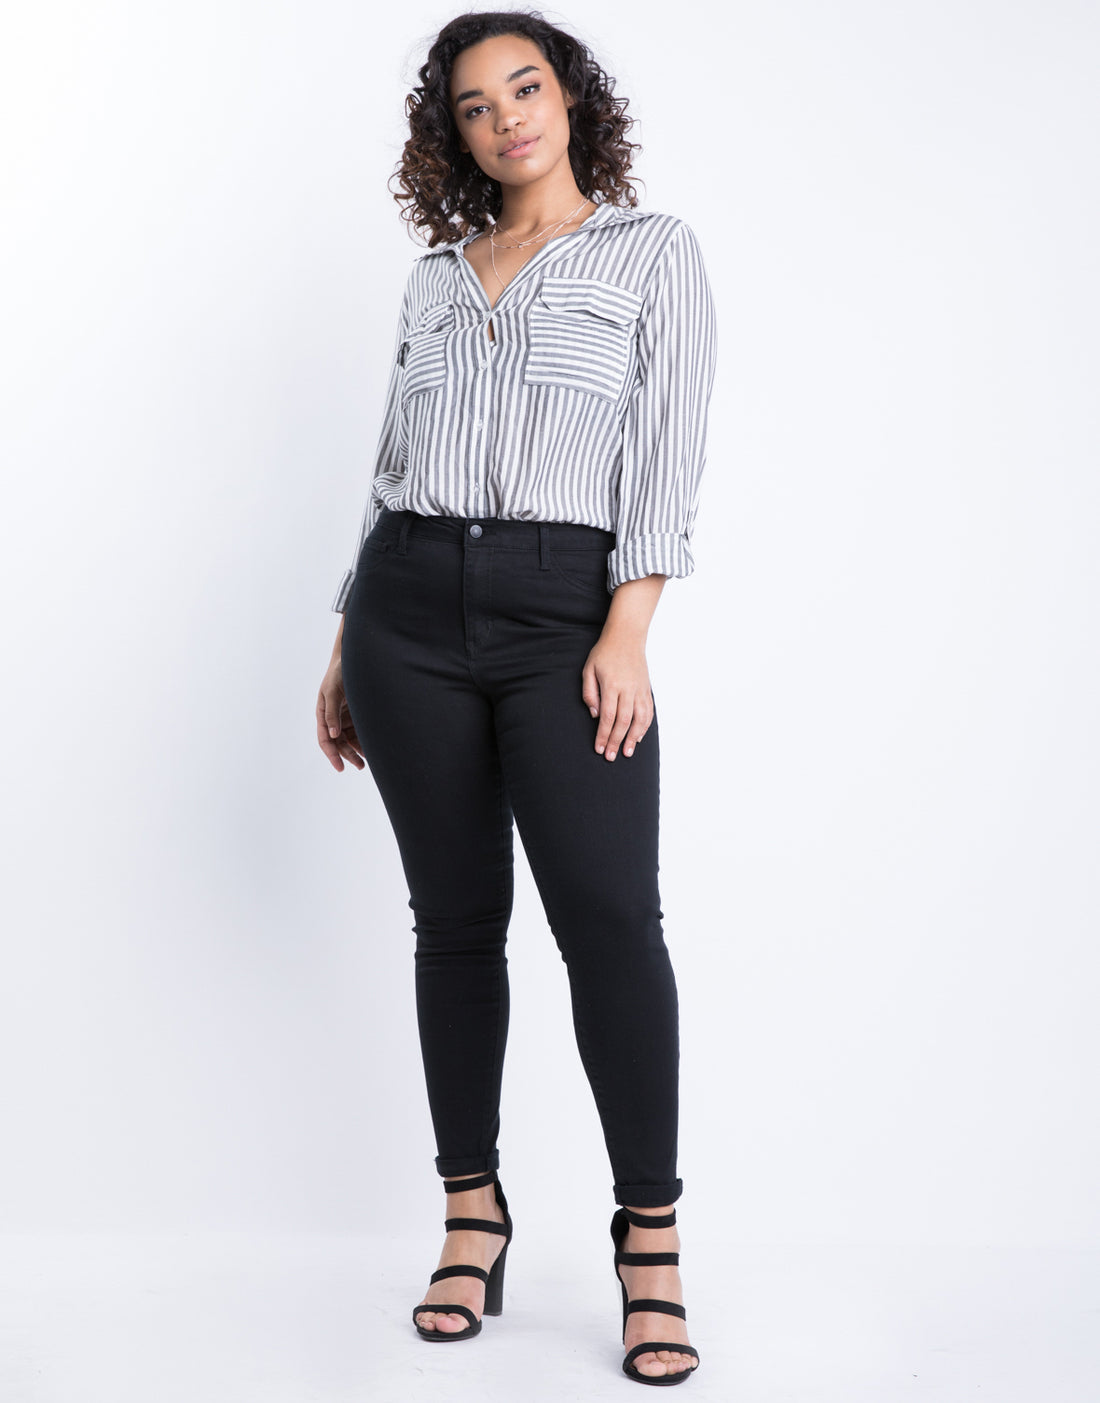 Curve Day to Day Jeans Plus Size Bottoms -2020AVE